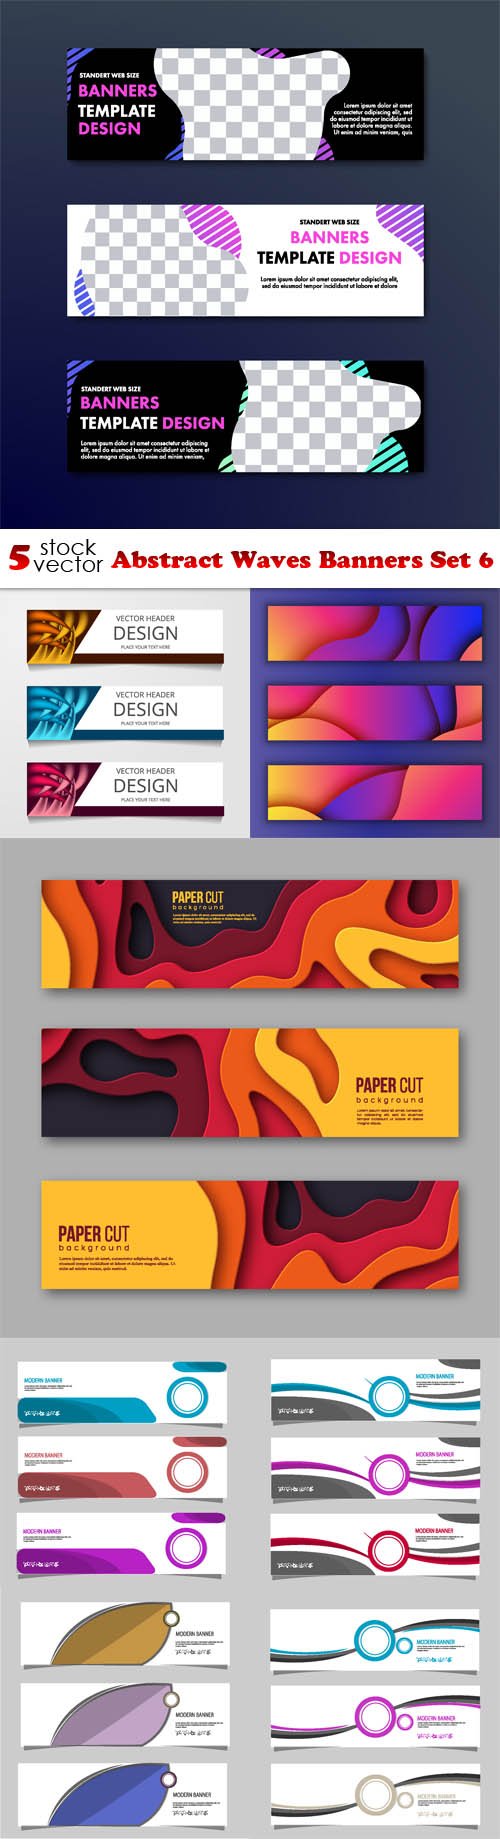 Vectors - Abstract Waves Banners Set 6